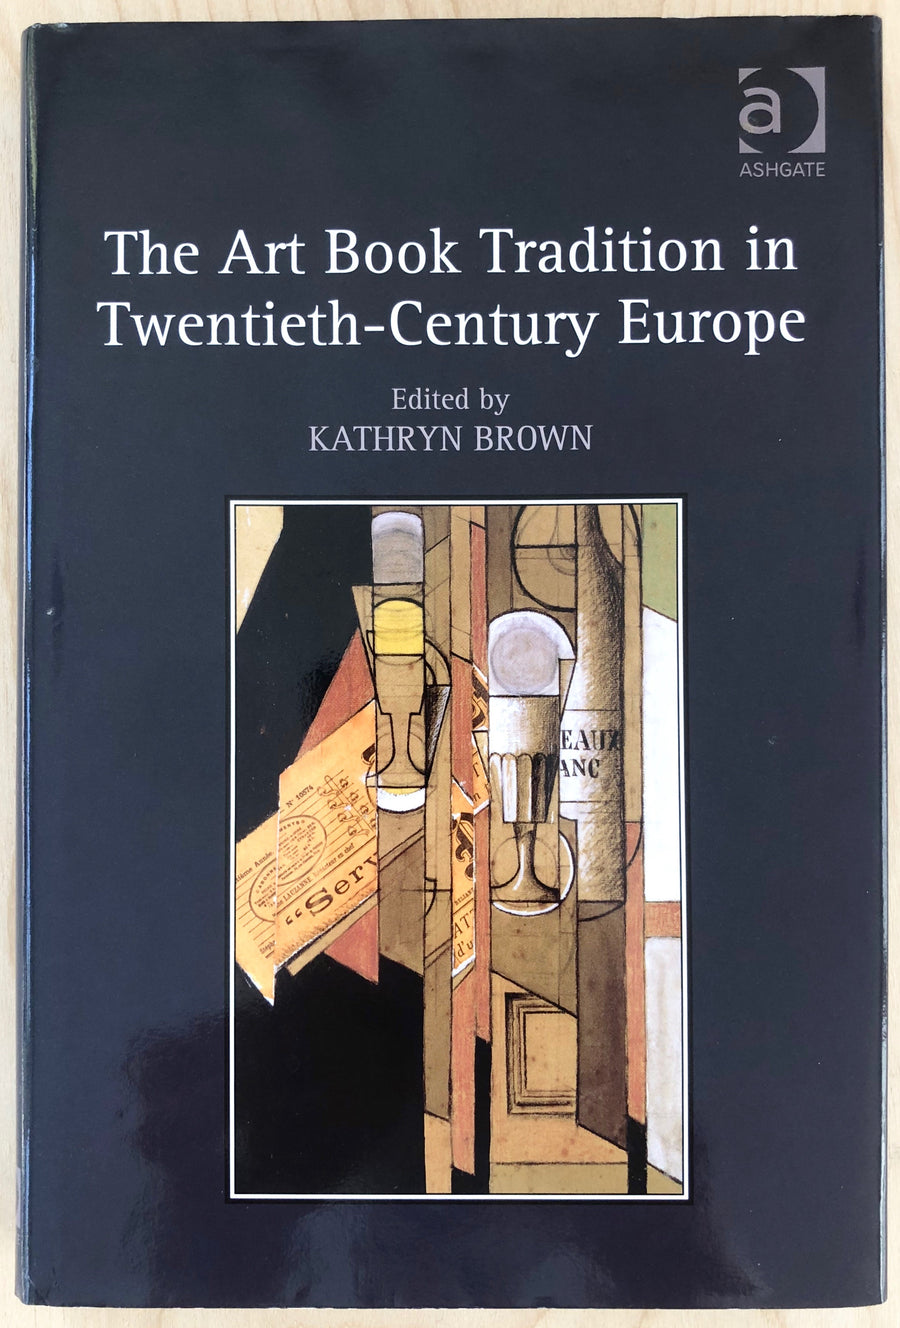 THE ART BOOK TRADITION IN TWENTIETH-CENTURY EUROPE edited by Kathryn Brown